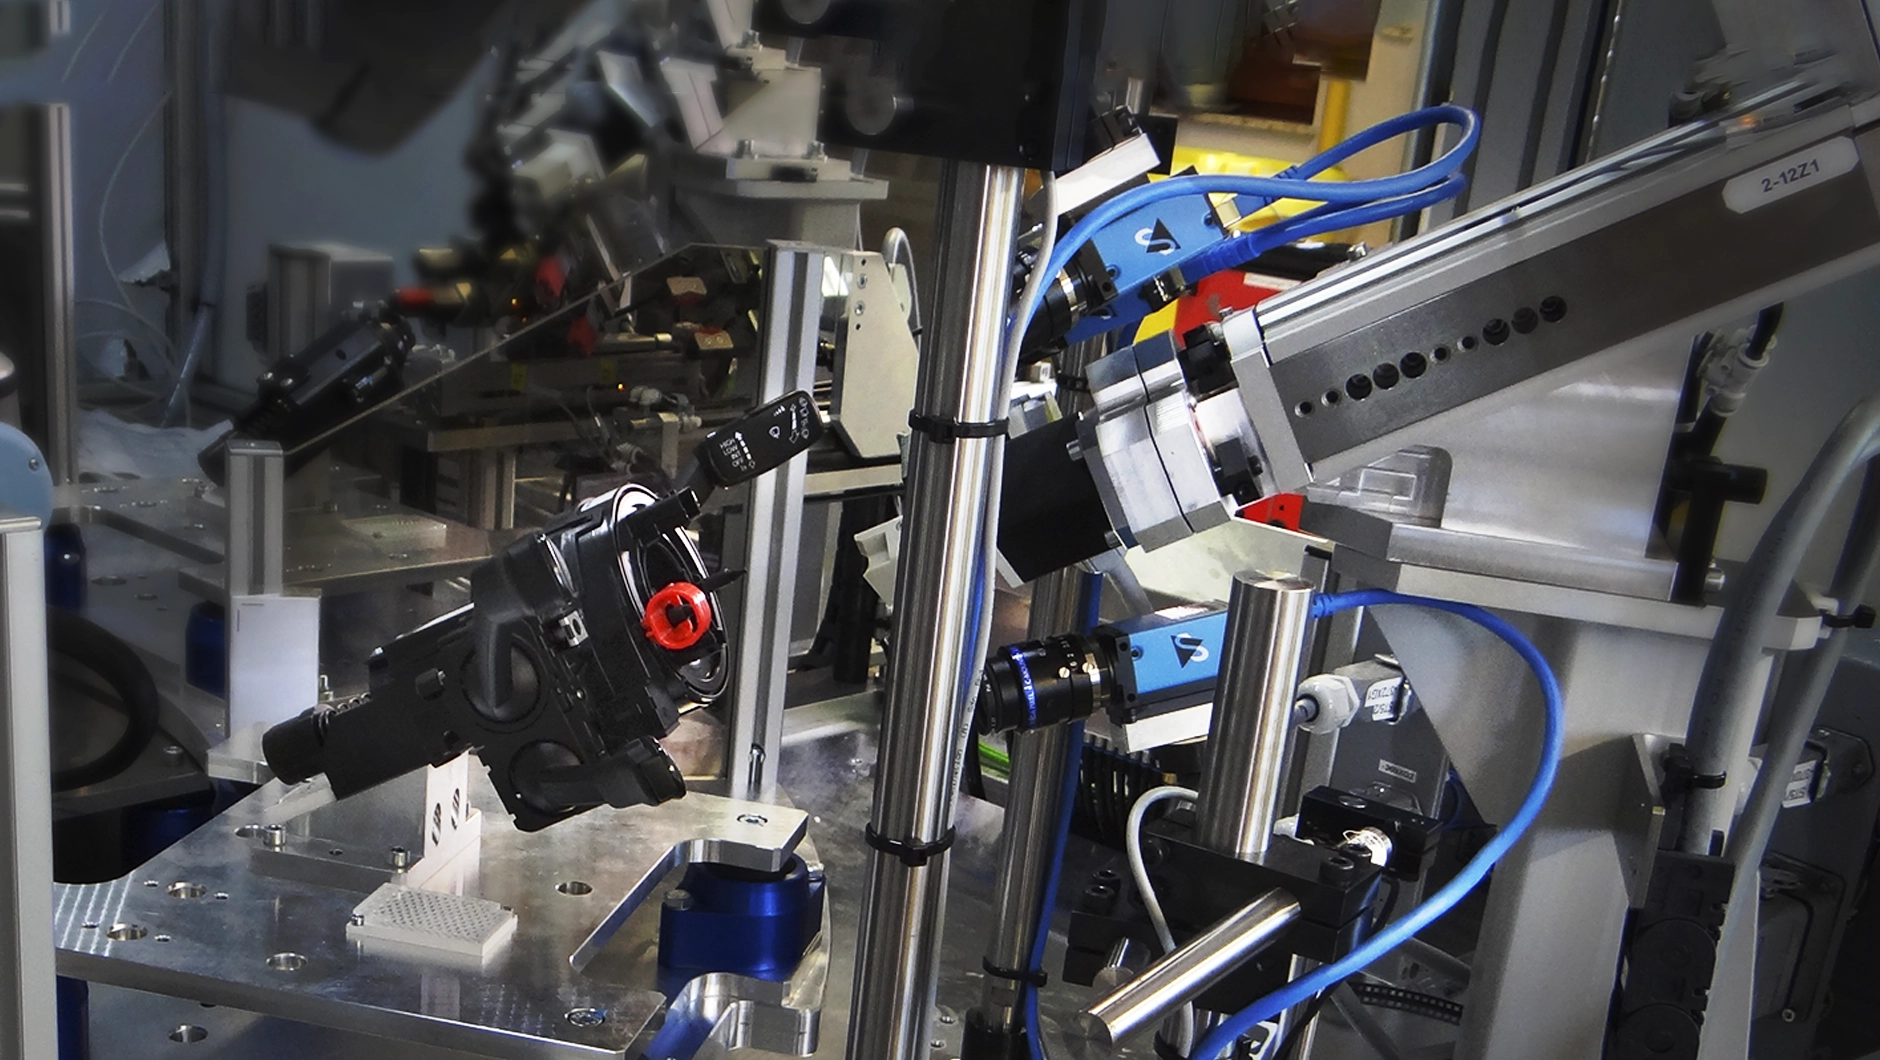 A multi-camera vision inspection system from ITgroup for steering column testing uses cobots and industrial cameras to perform an array of inspection tasks on steering column components: presence detection, surface inspection, measurement, and image documentation. (Image courtesy of ITgroup.)